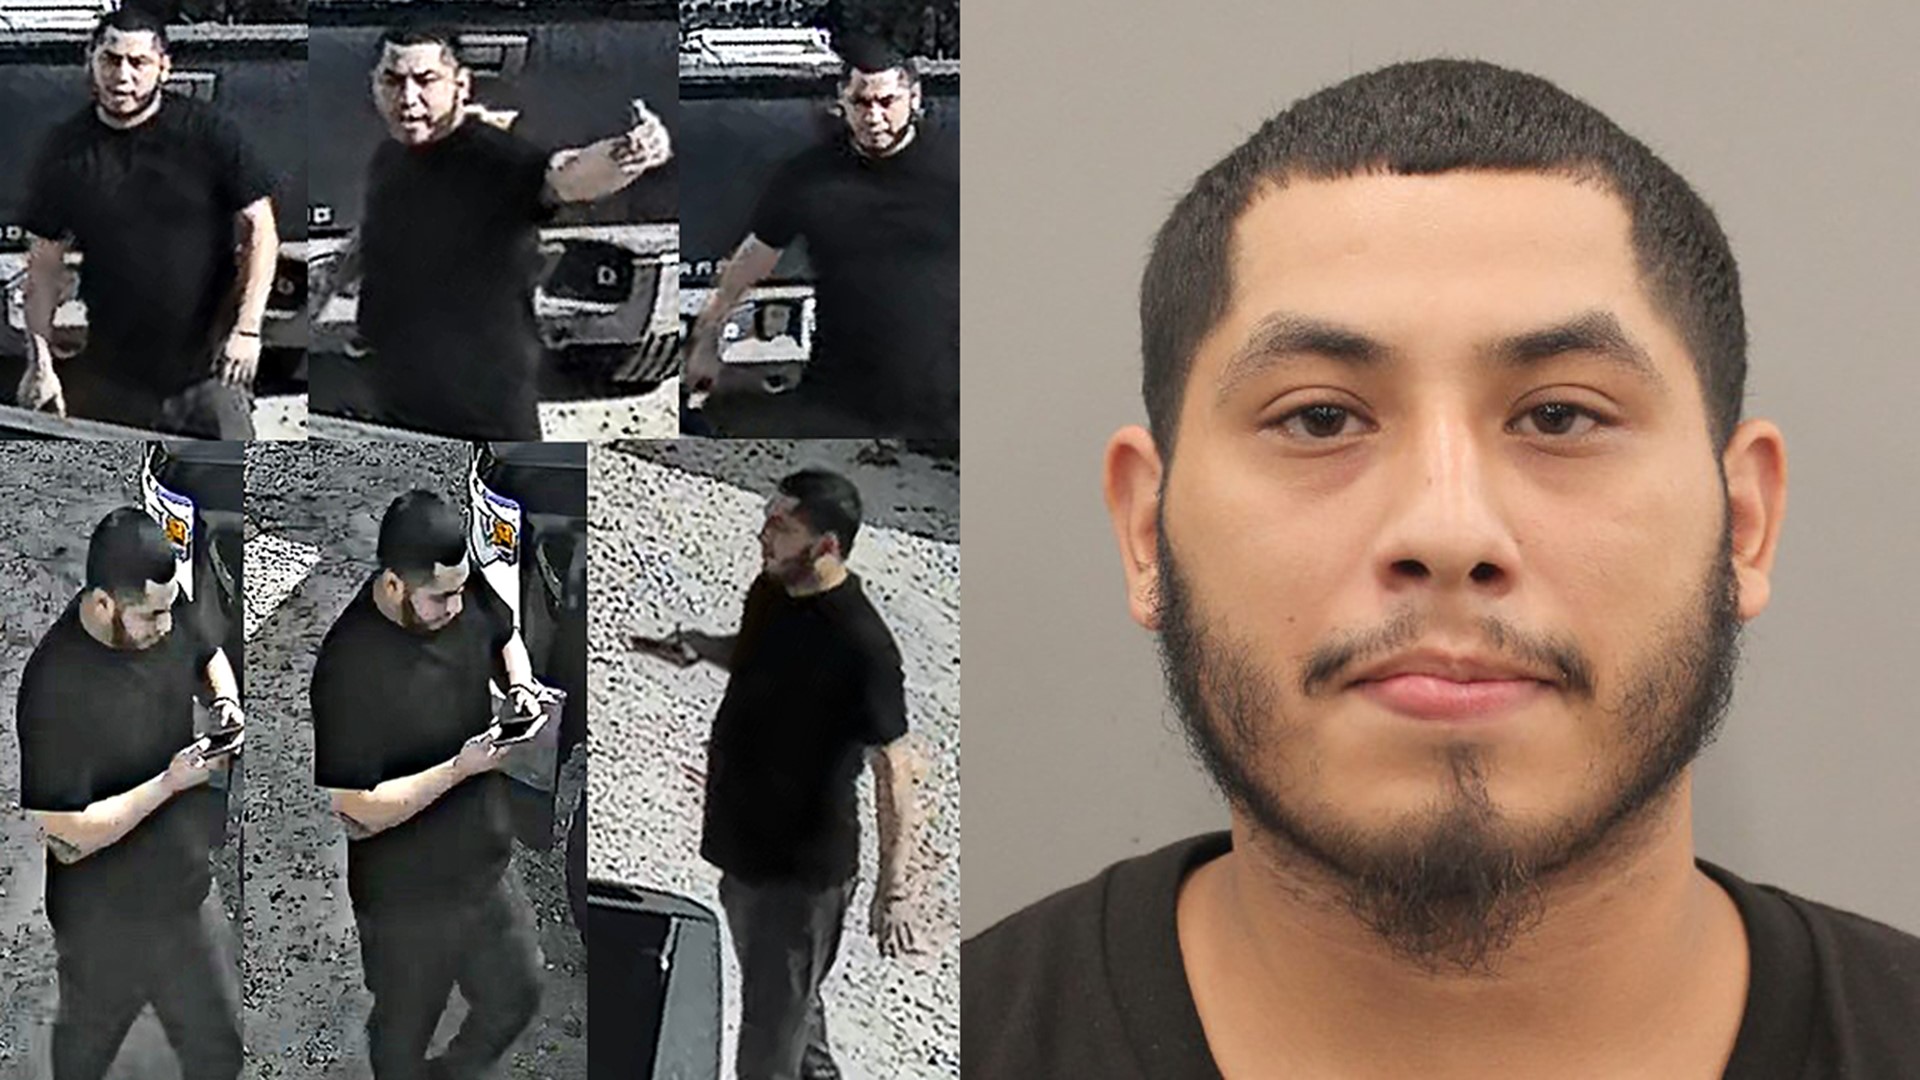 HPD said Jason Frank Vazquez is the person who was seen in surveillance video talking to accused murderer Robert Soliz after the deadly shooting.